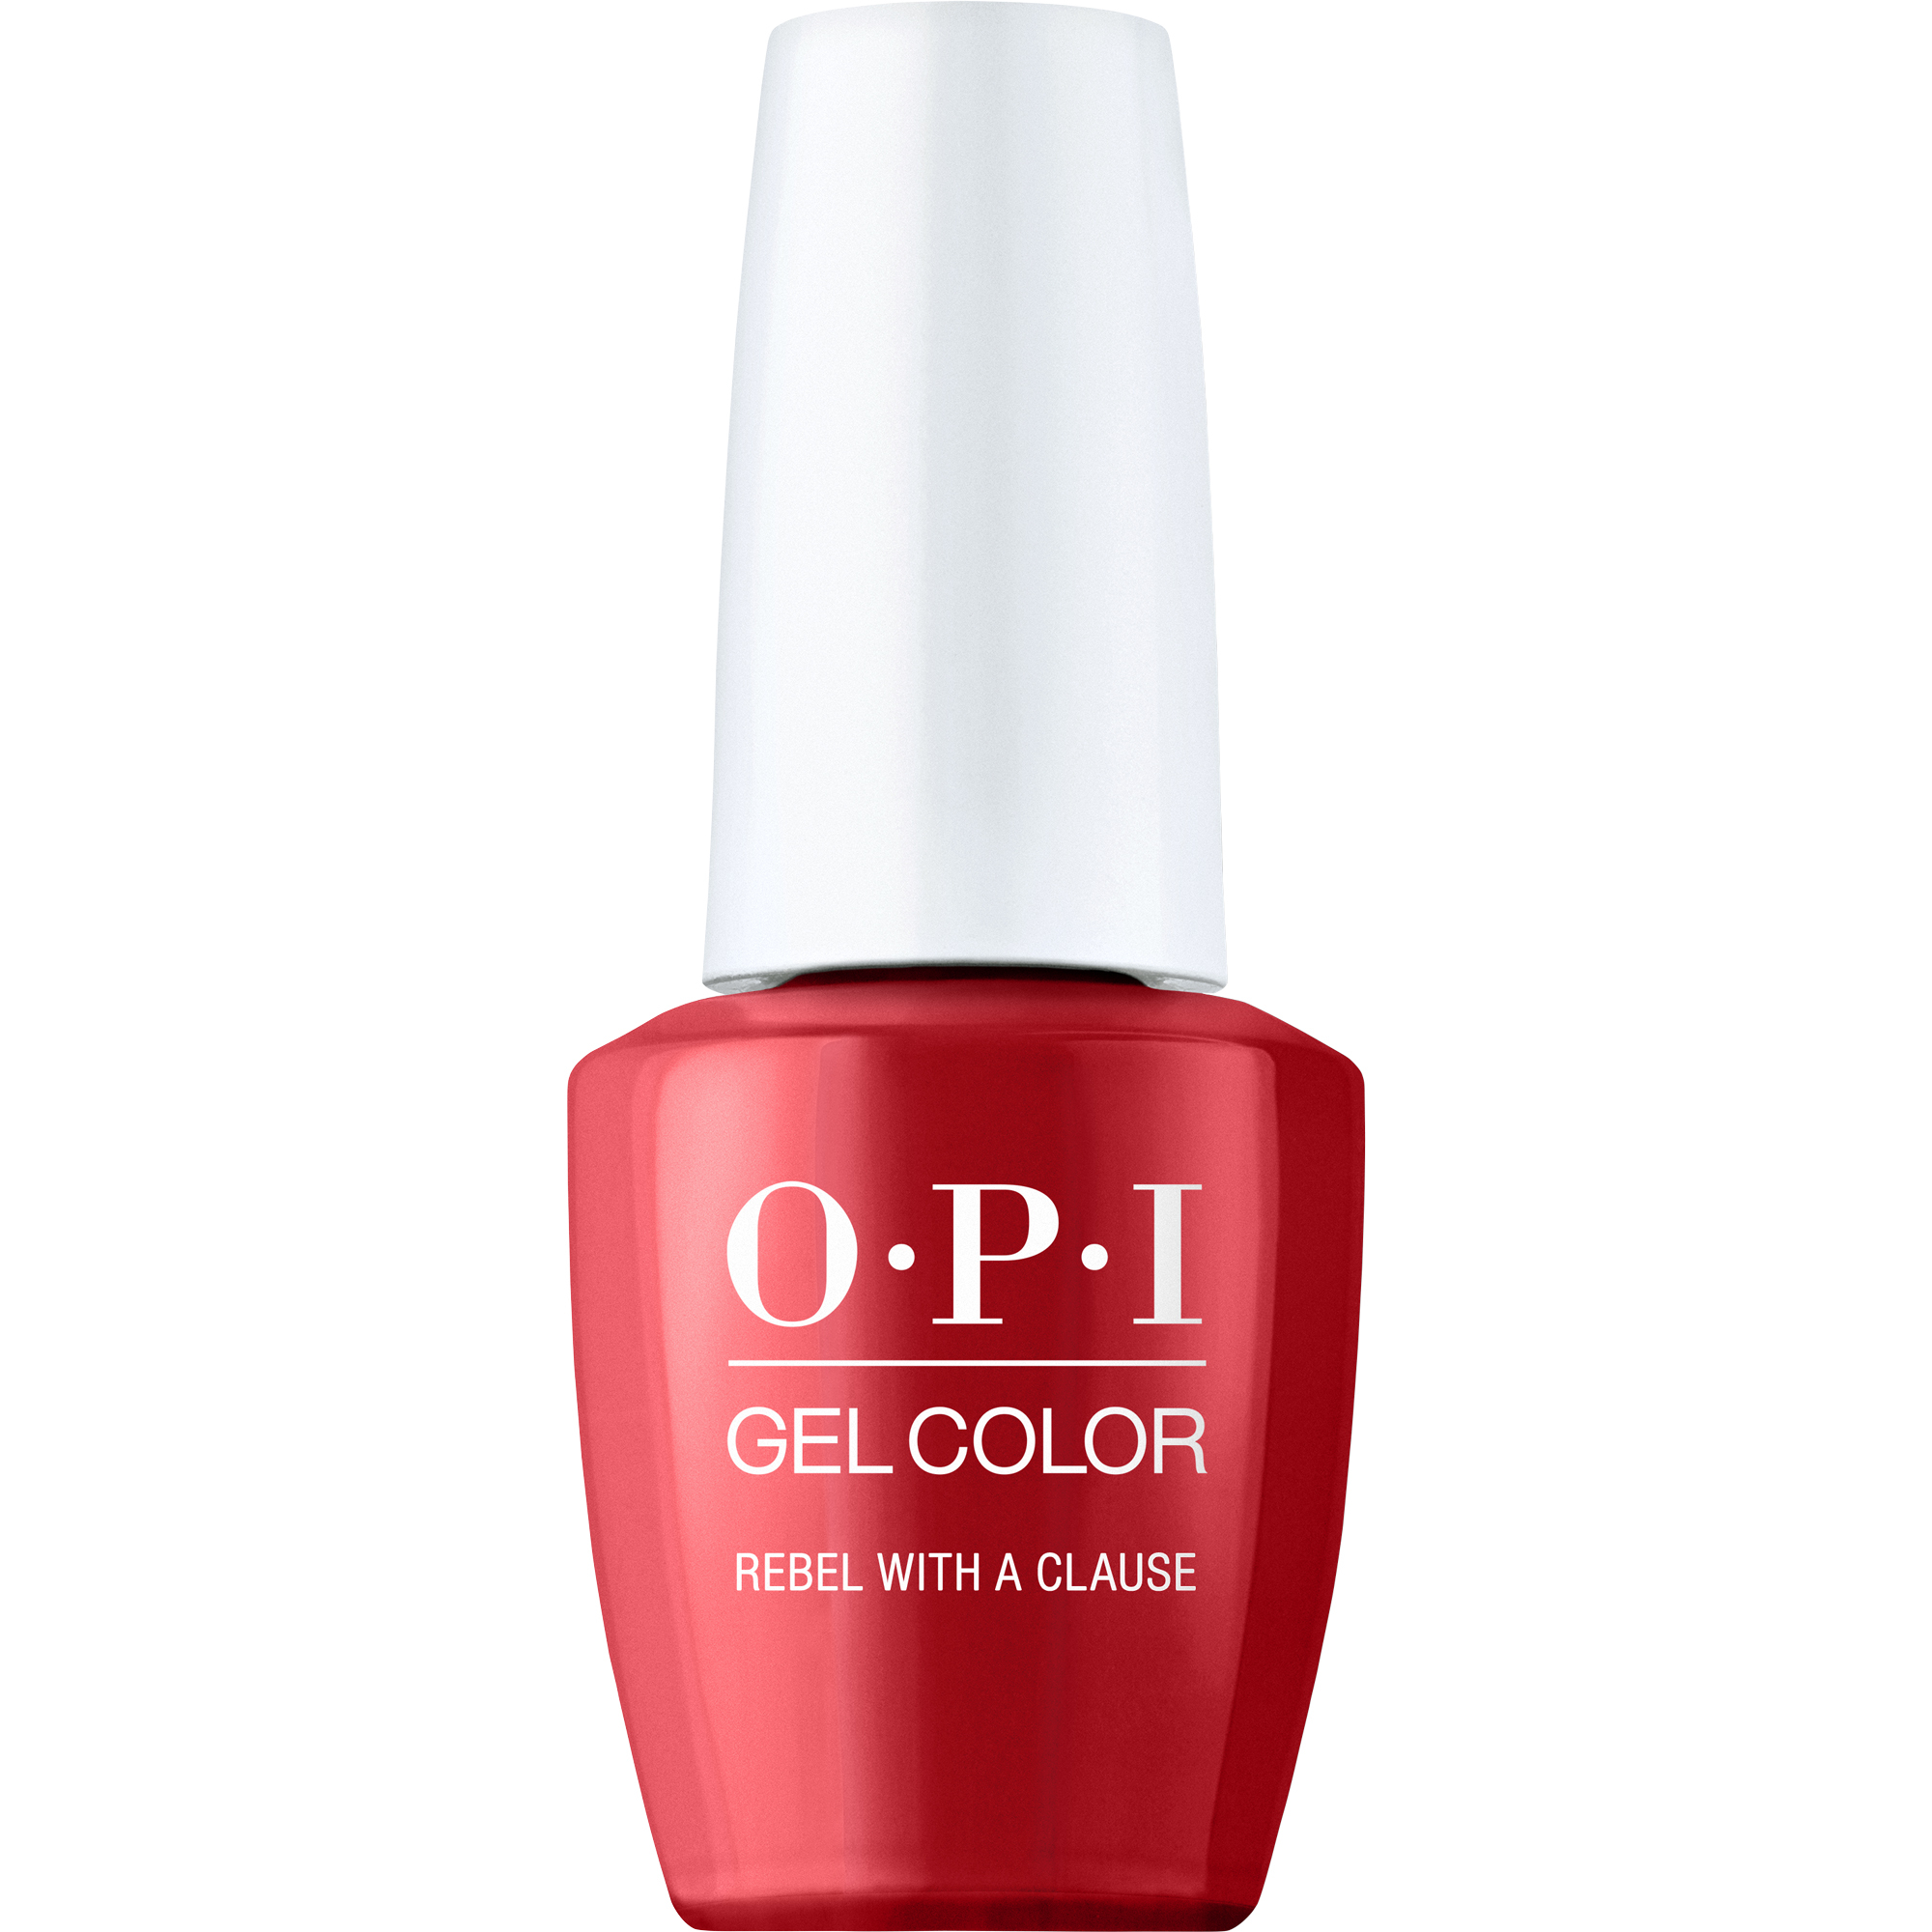 OPI Gel Color 360 - Rebel With A Clause